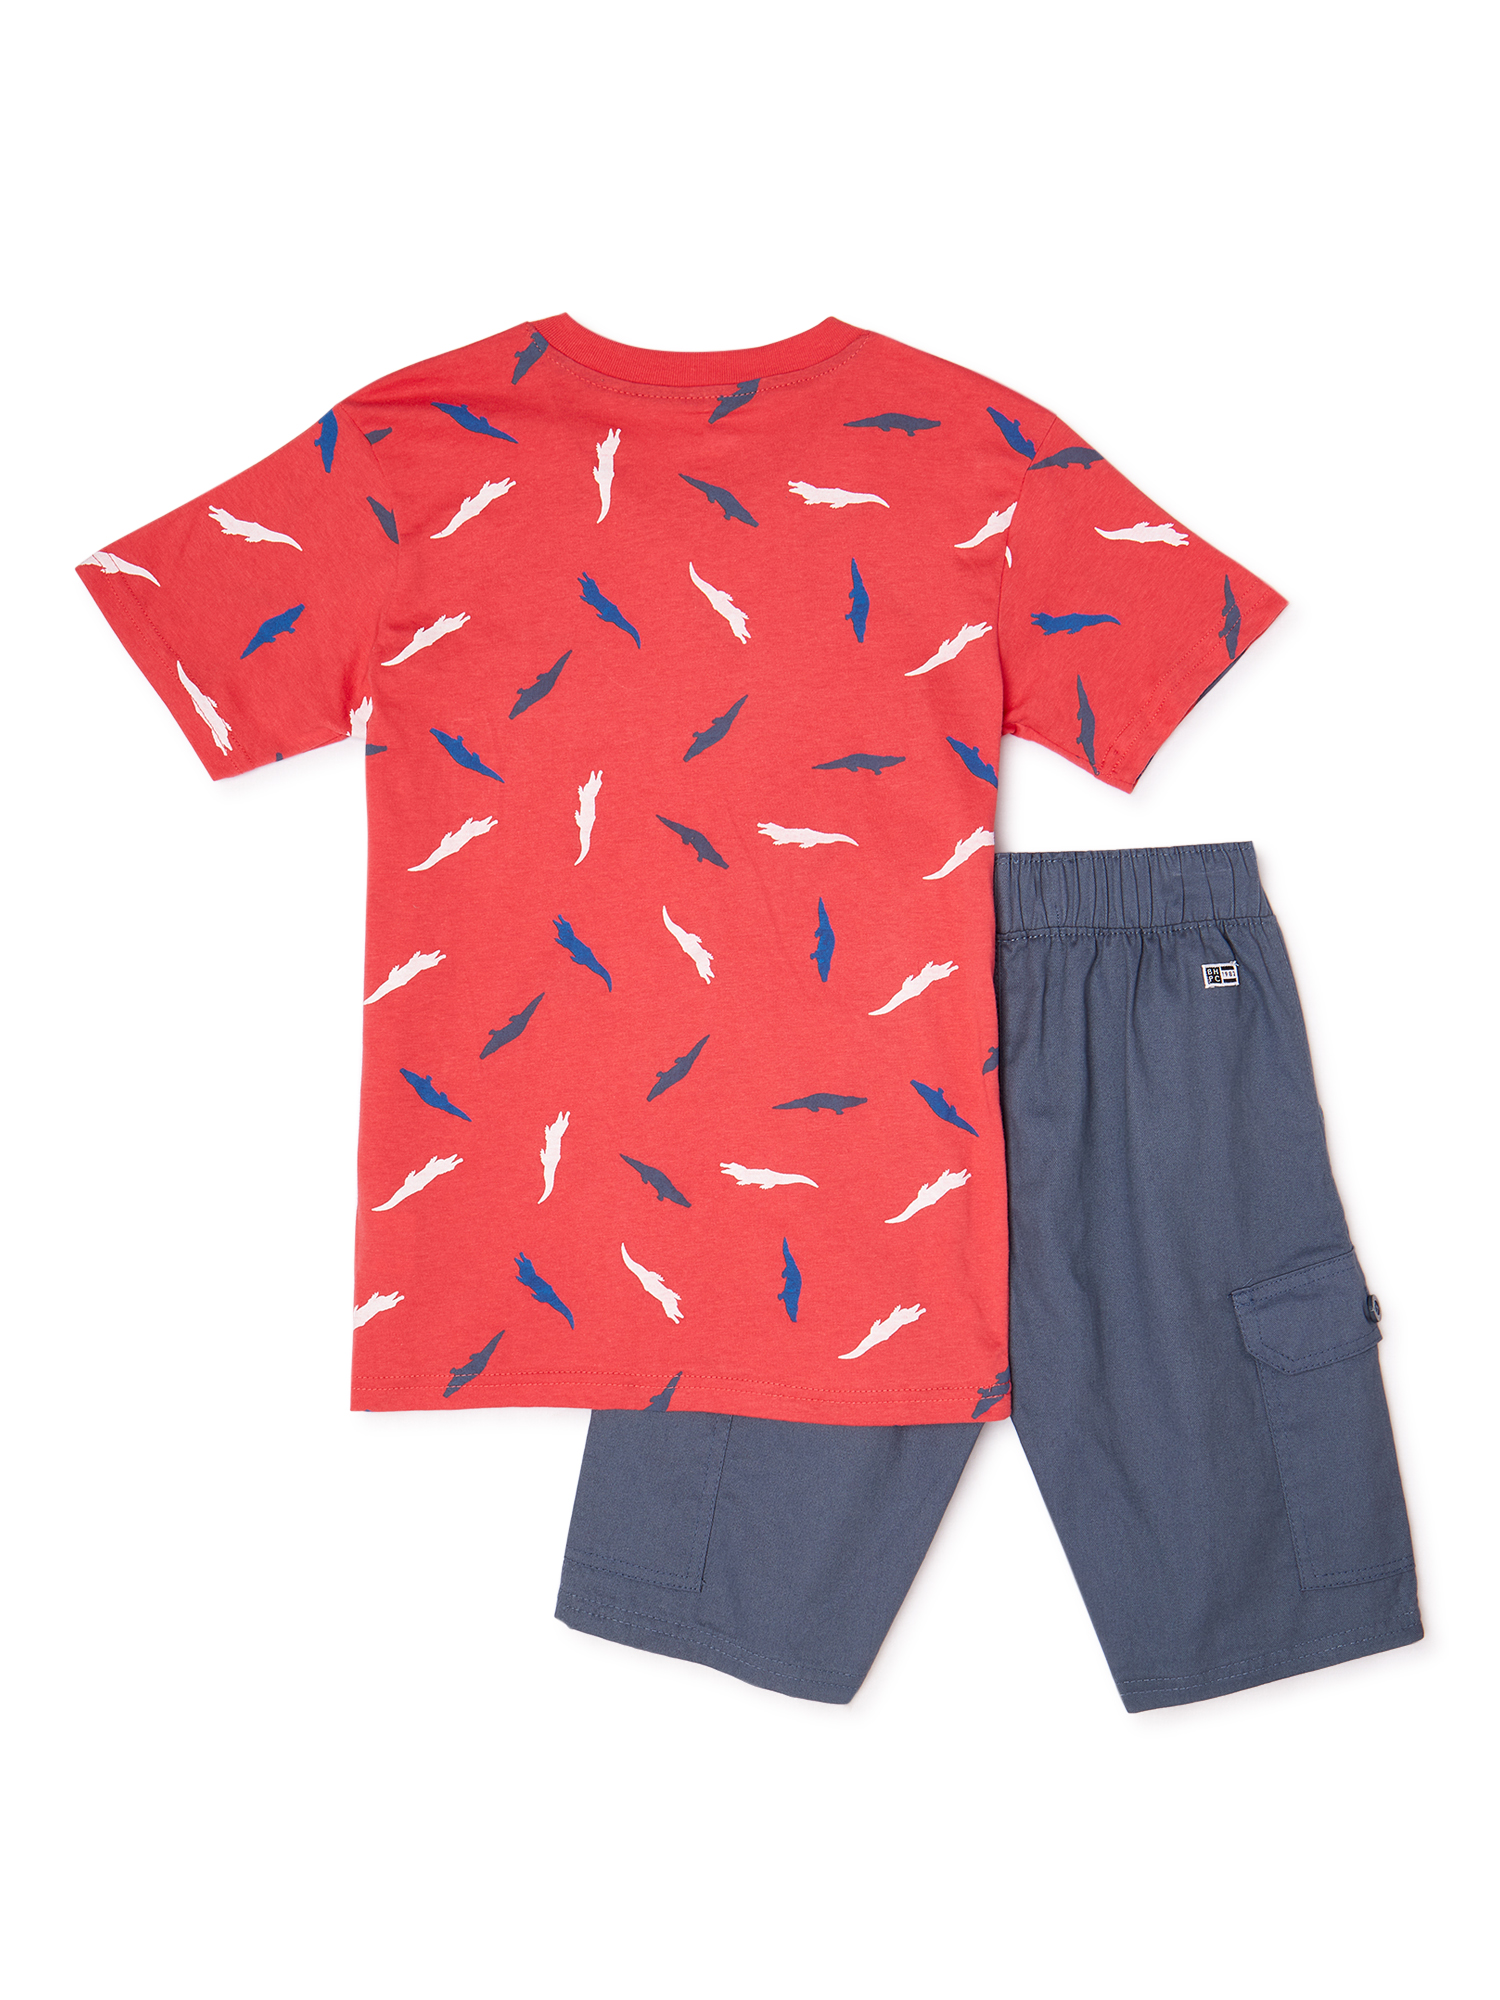 Beverly Hills Polo Club Boys 4-12 Short Sleeve T-Shirt & Cargo Shorts, 2-Piece Outfit Set - image 3 of 3